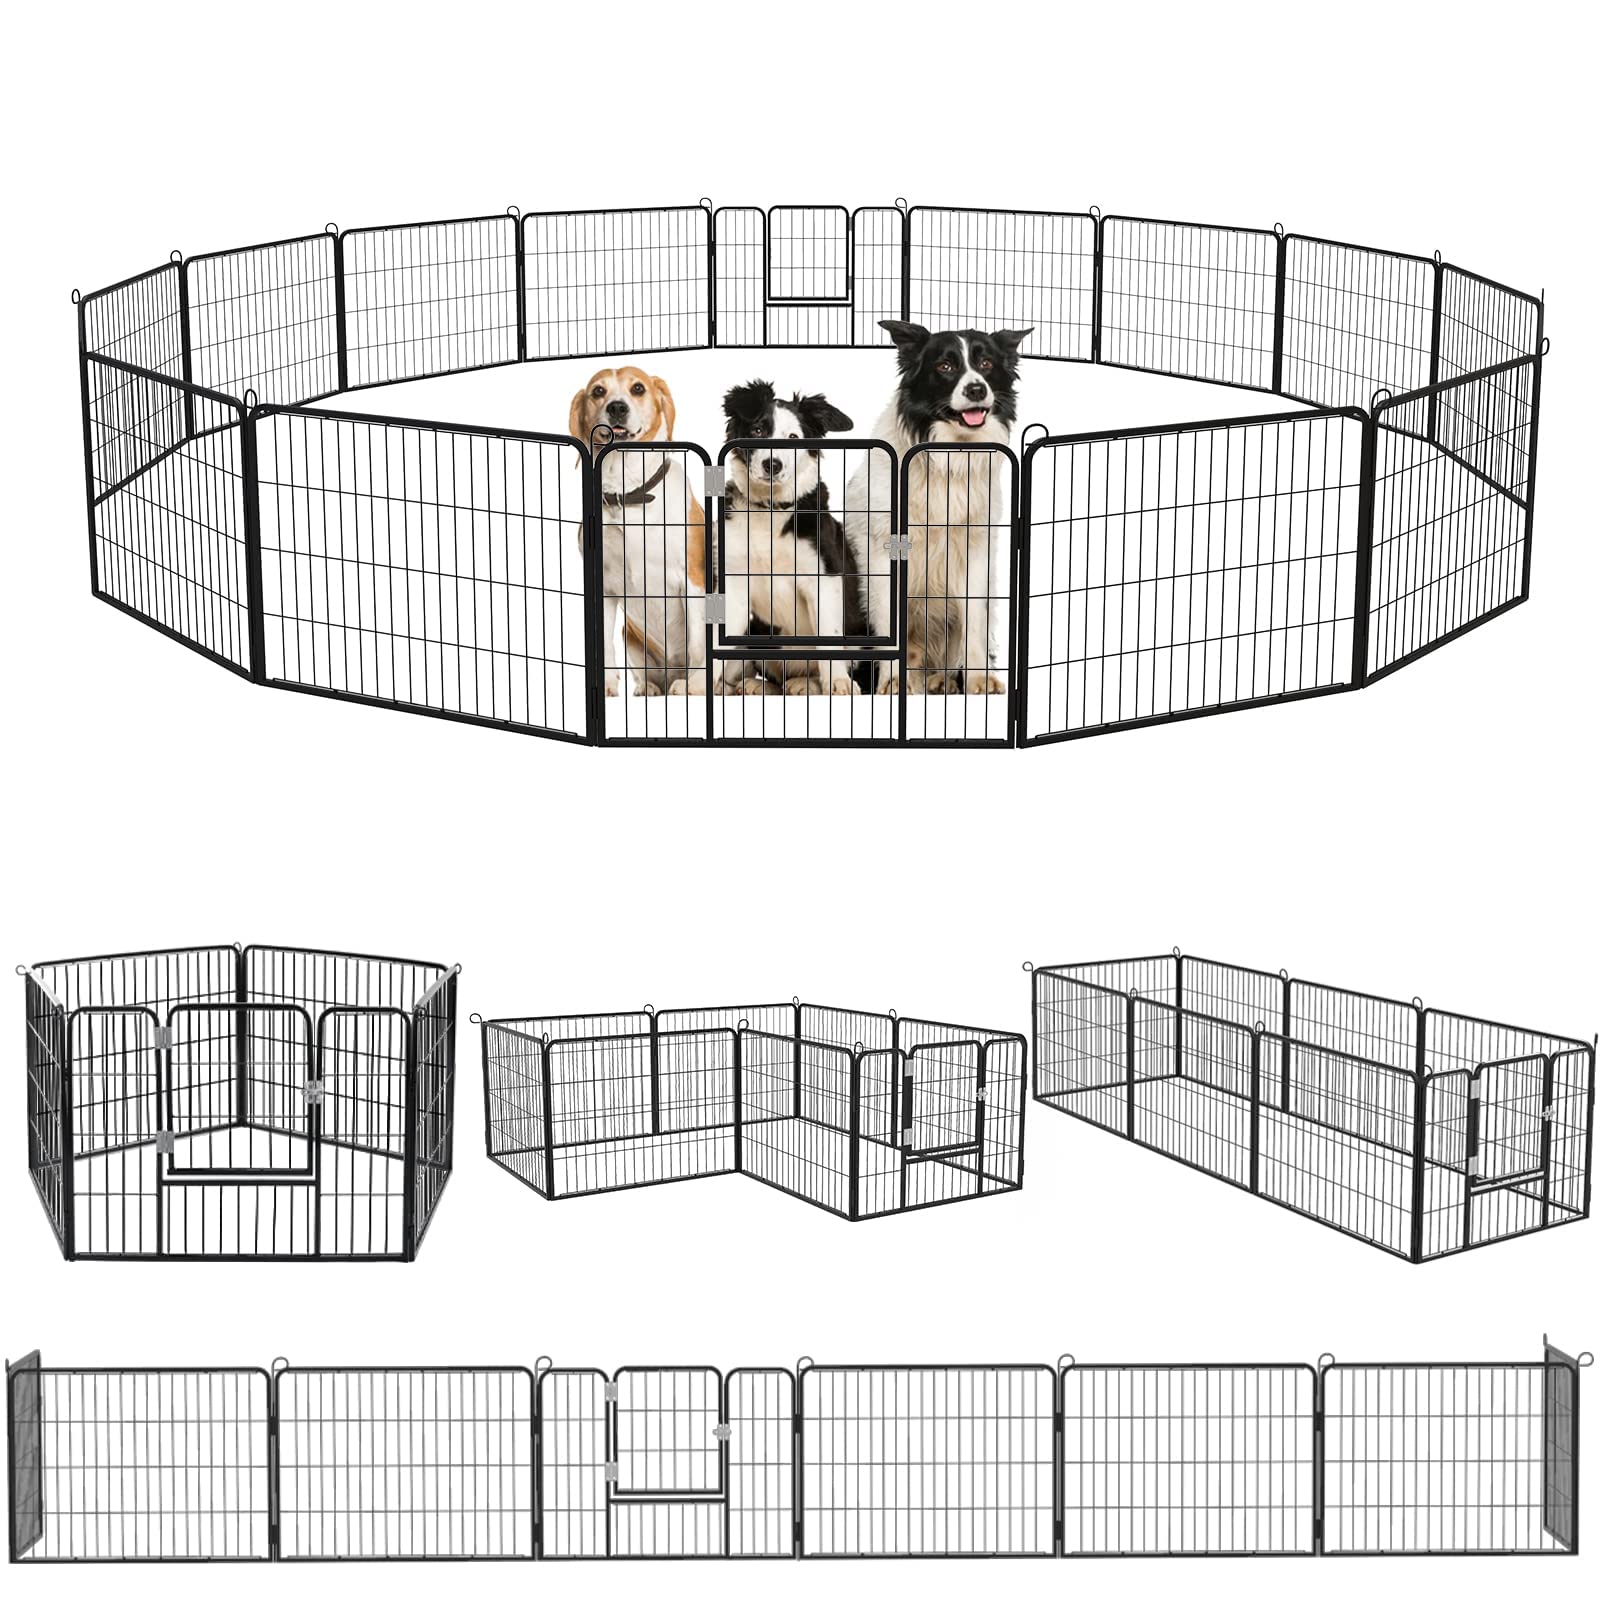 Tavata Heavy Duty Metal Dog Playpen Dog Fence For Outdoor, 816 Panels 243240 Height Rustproof Dog Fence With Doors, Pet Fence Fo